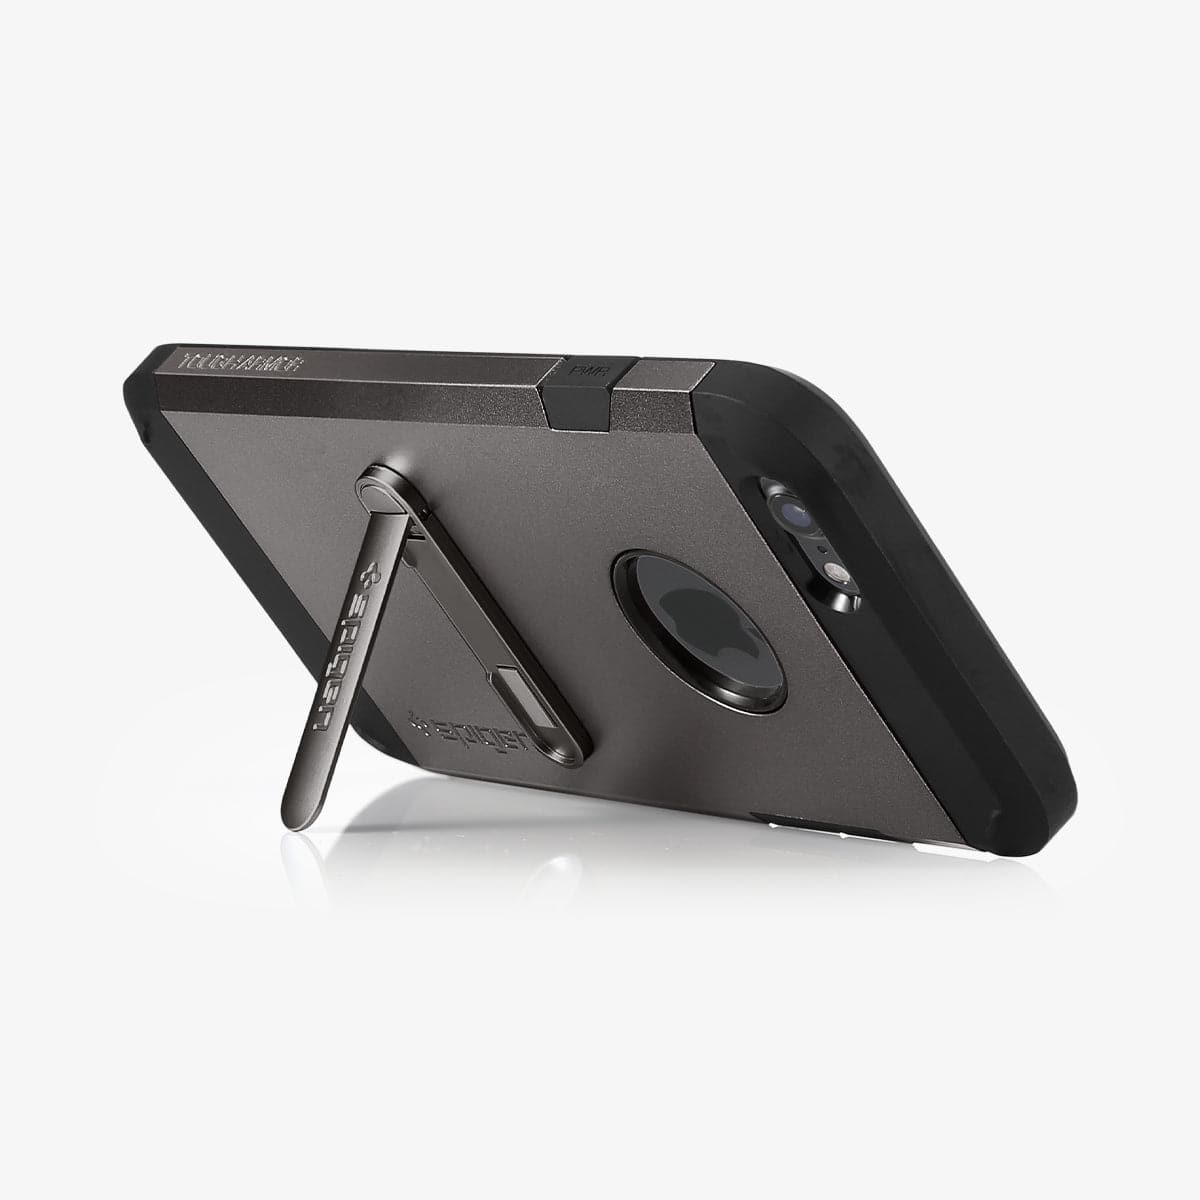 000EM20860 - U100 Universal Kickstand (Metal) in gunmetal showing the phone propped up by kickstand attached to back of device